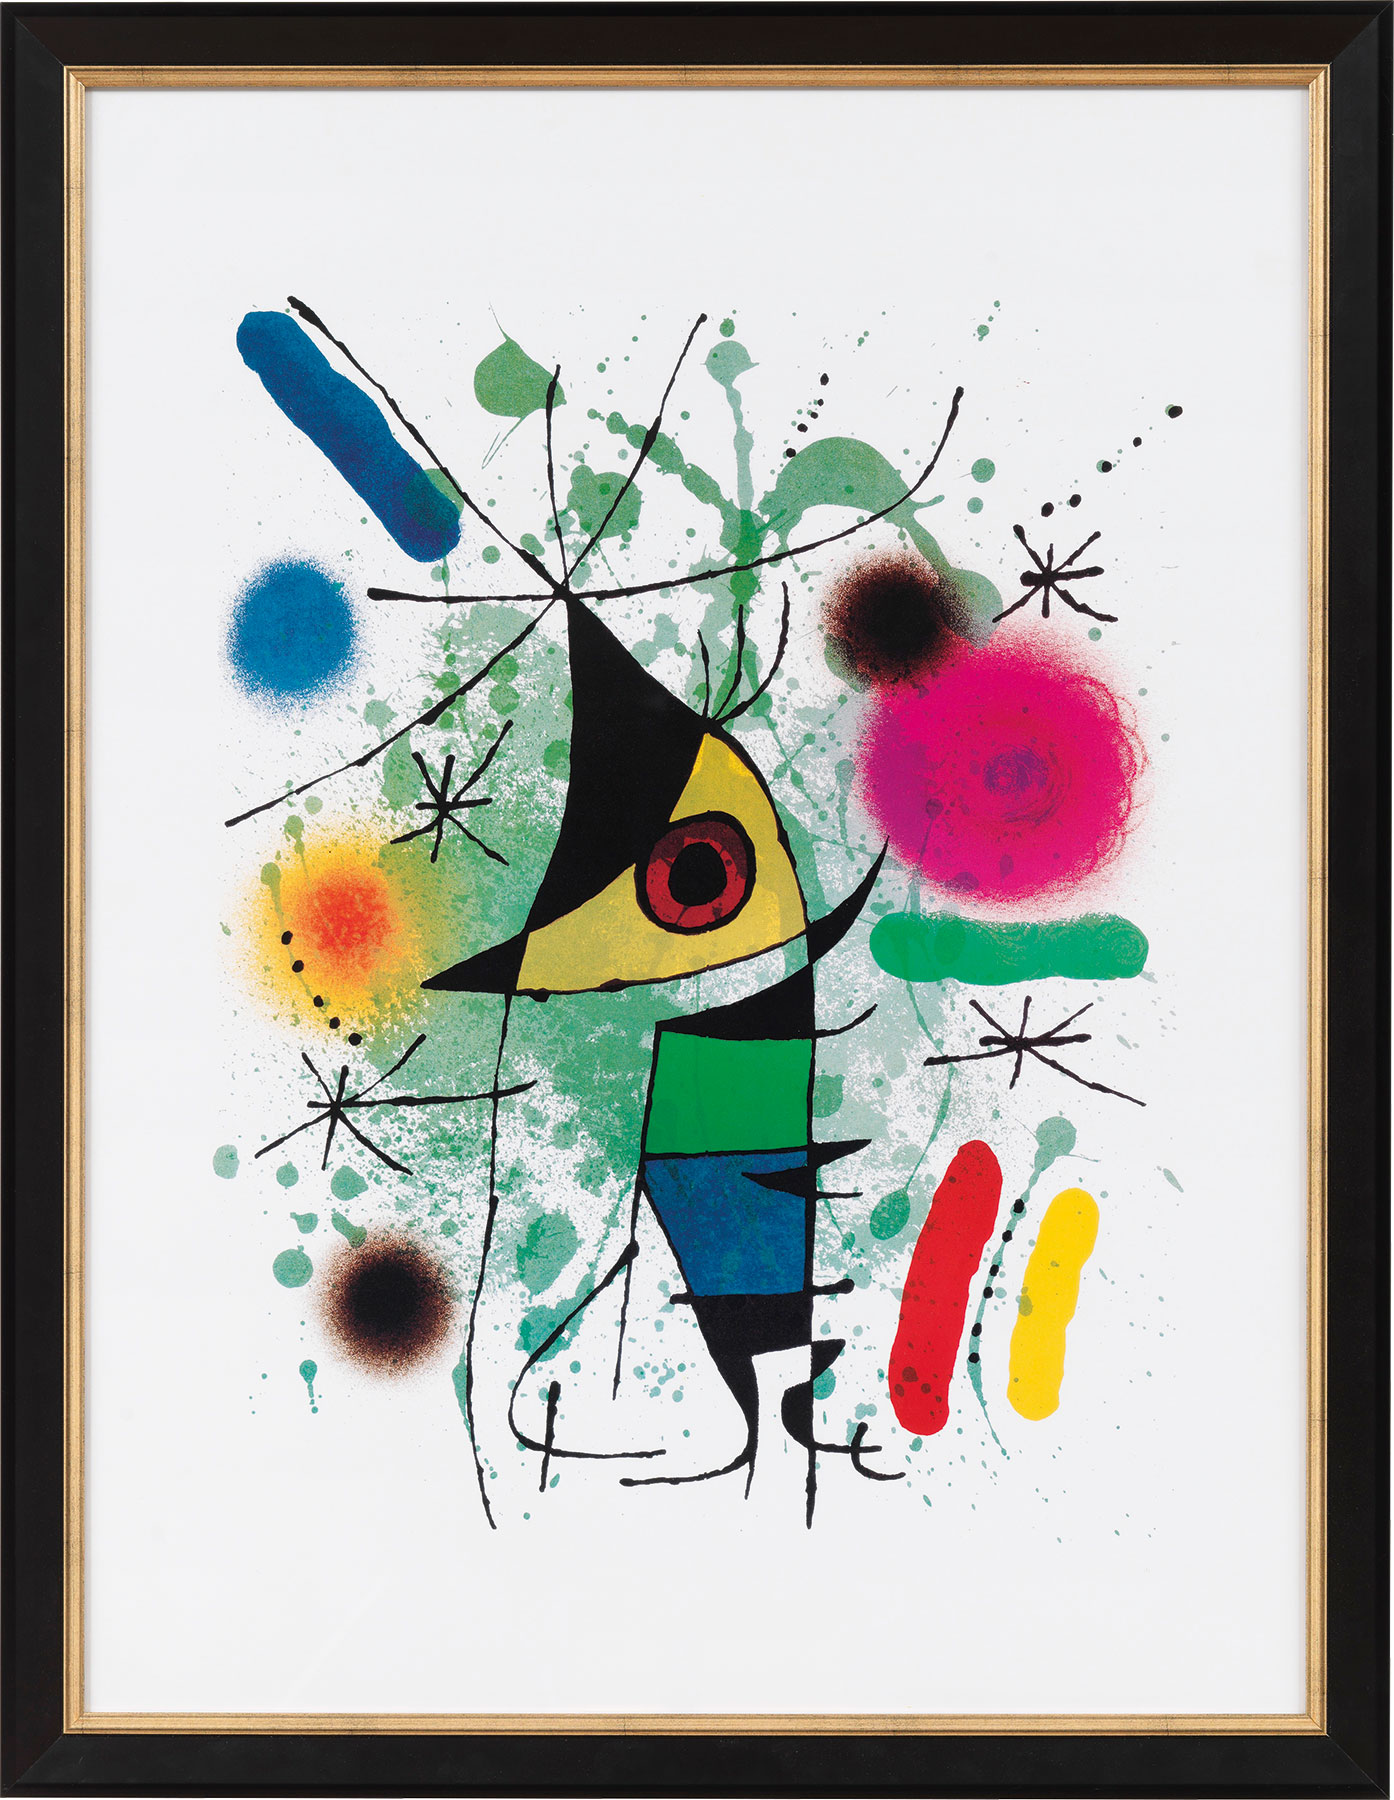 Picture "The Singing Fish" (1972), framed by Joan Miró